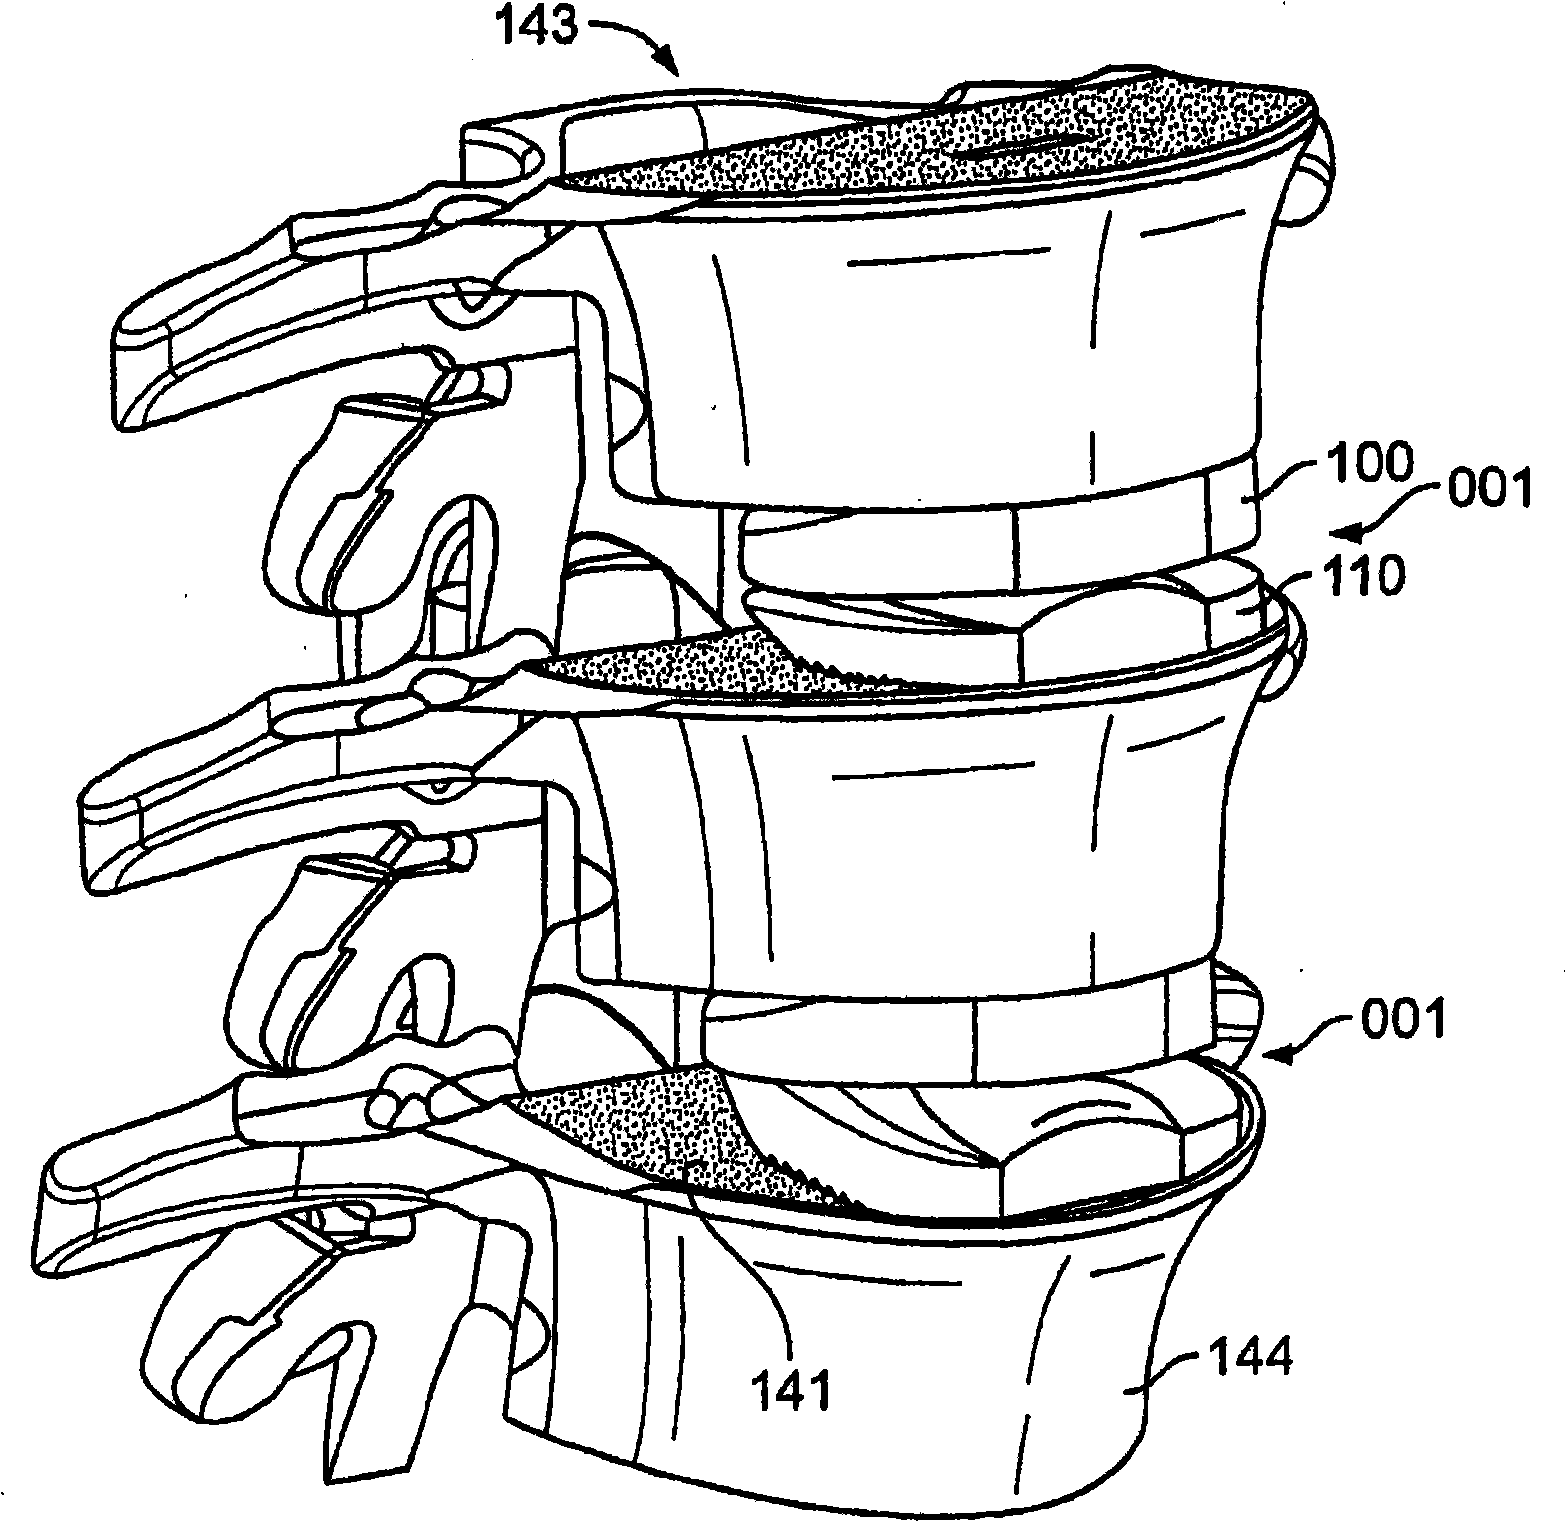 Systems and methods for sizing, inserting and securing an implant intervertebral space